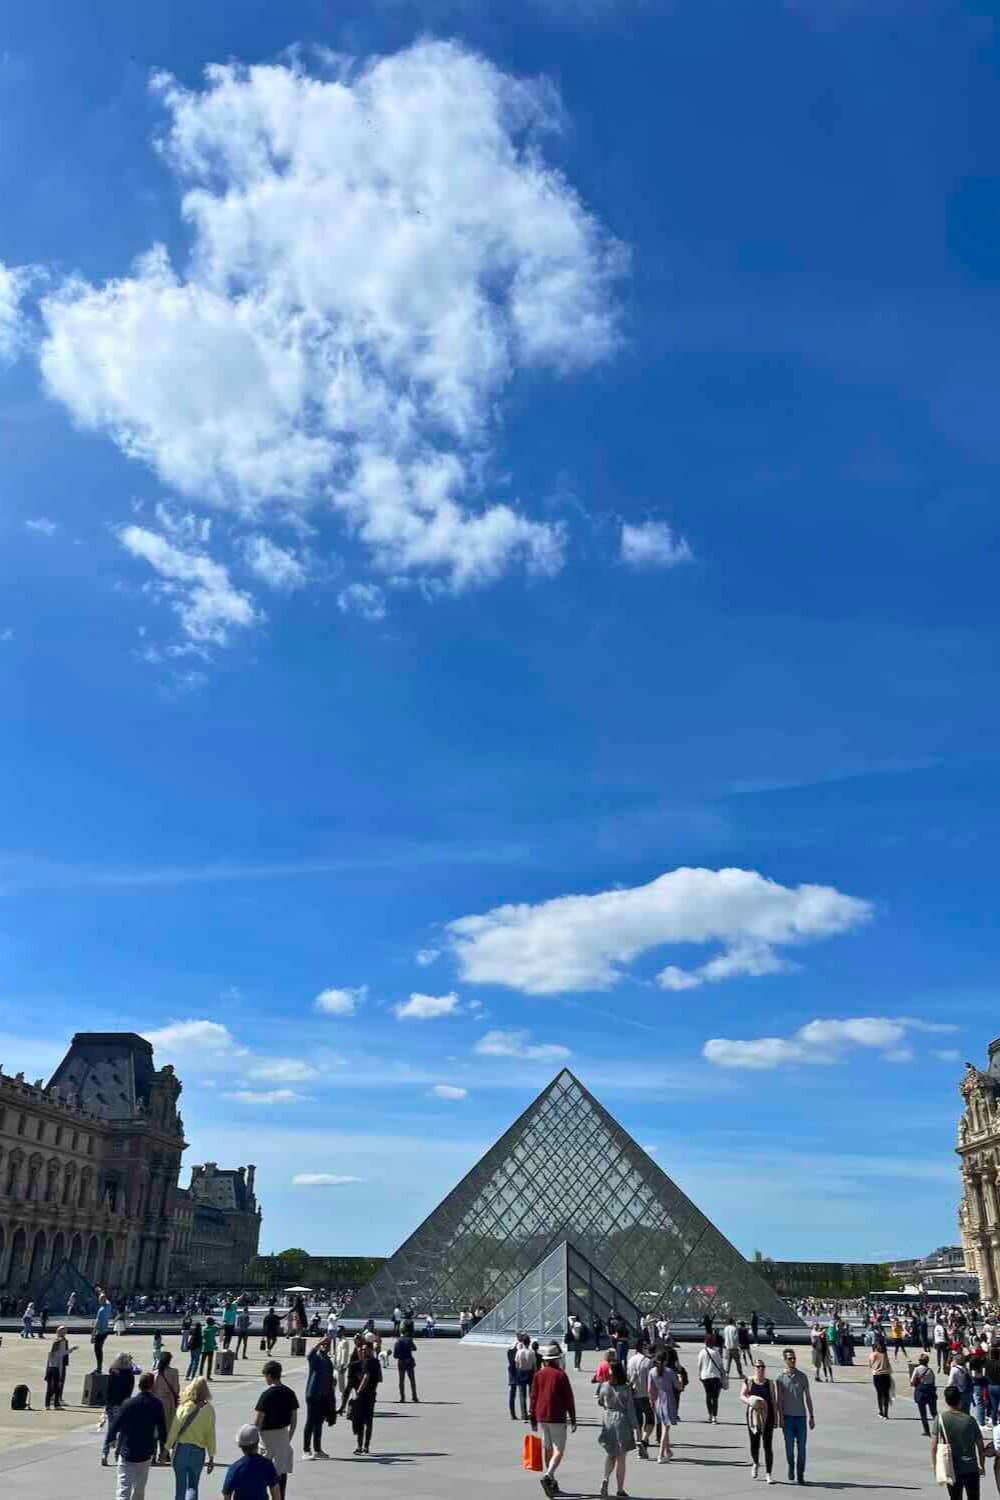 clear day scene at the Louvre Museum's courtyard, showcasing the large glass pyramid under a blue sky scattered with clouds.